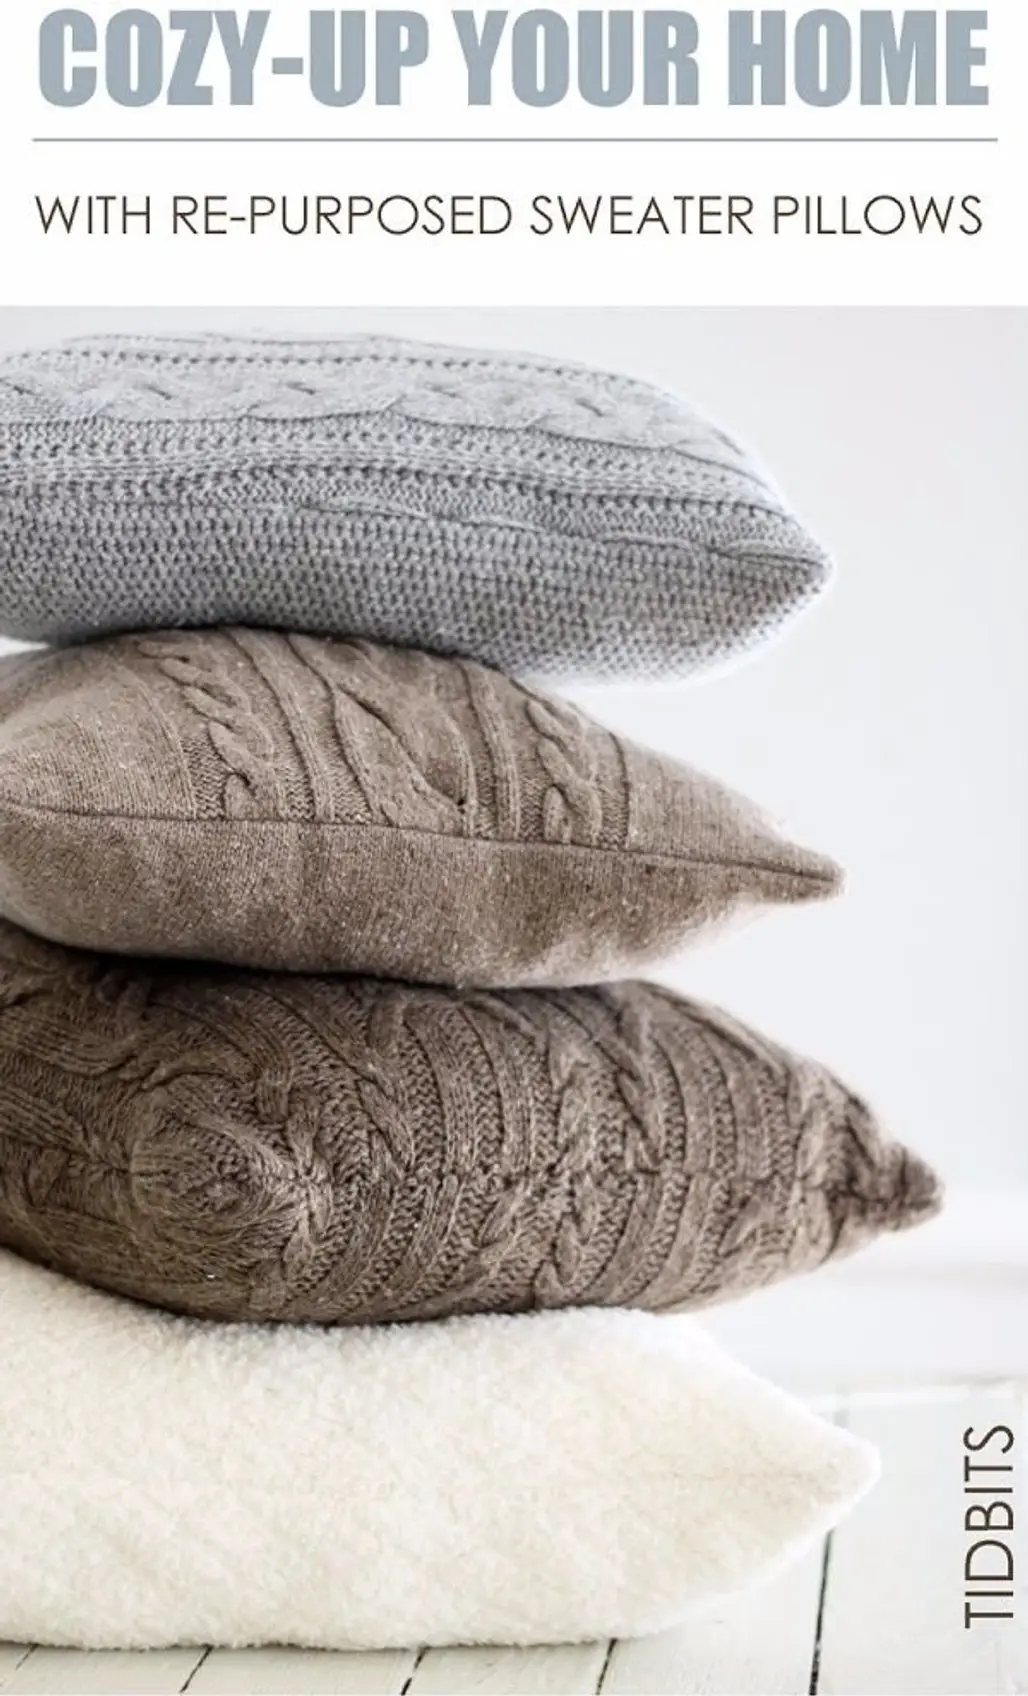 Re-Purposed Sweater Pillows,